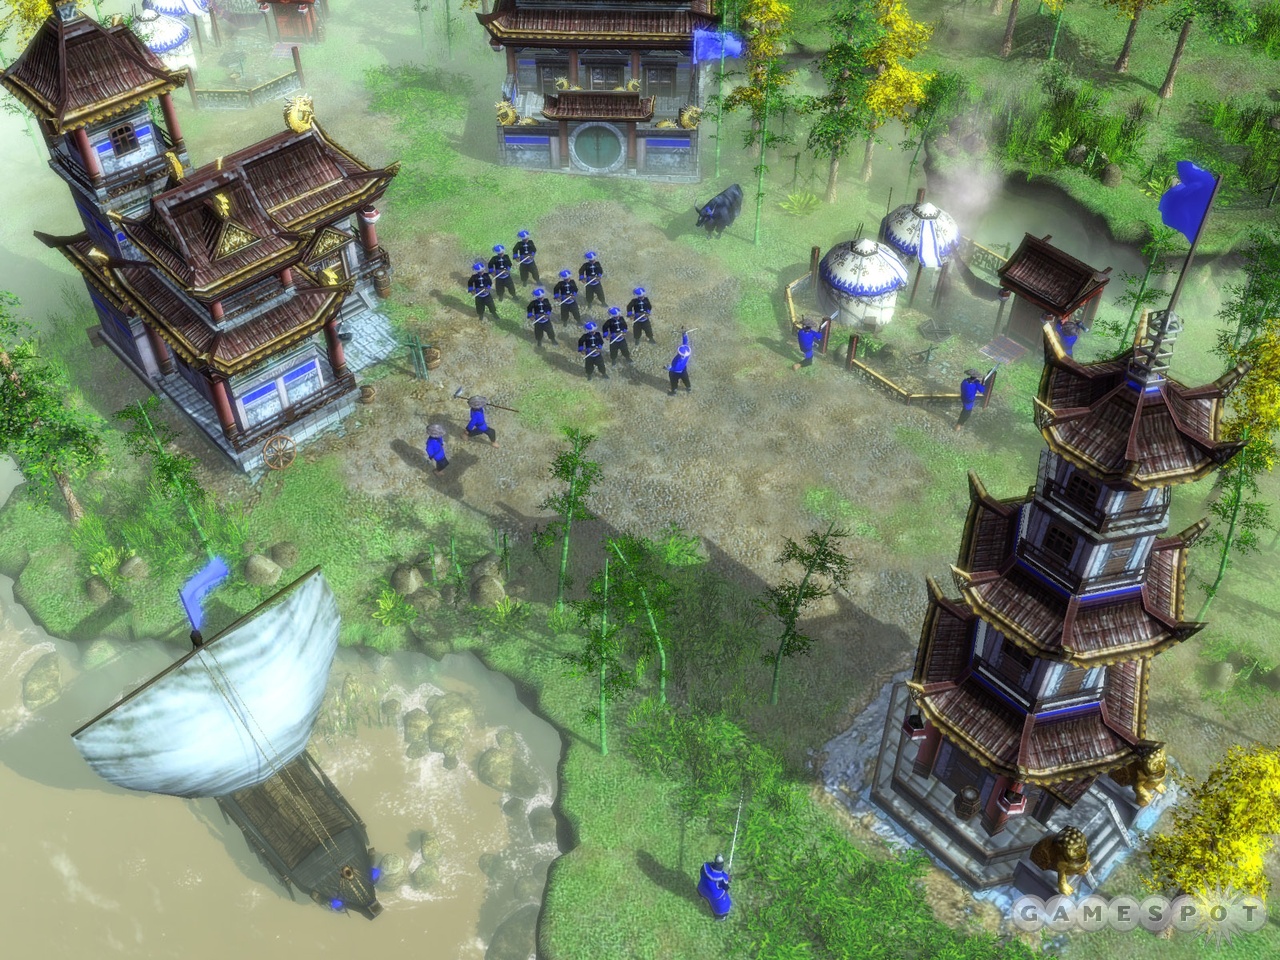 Age of Empires III makes it way to the Far East with this new expansion pack.